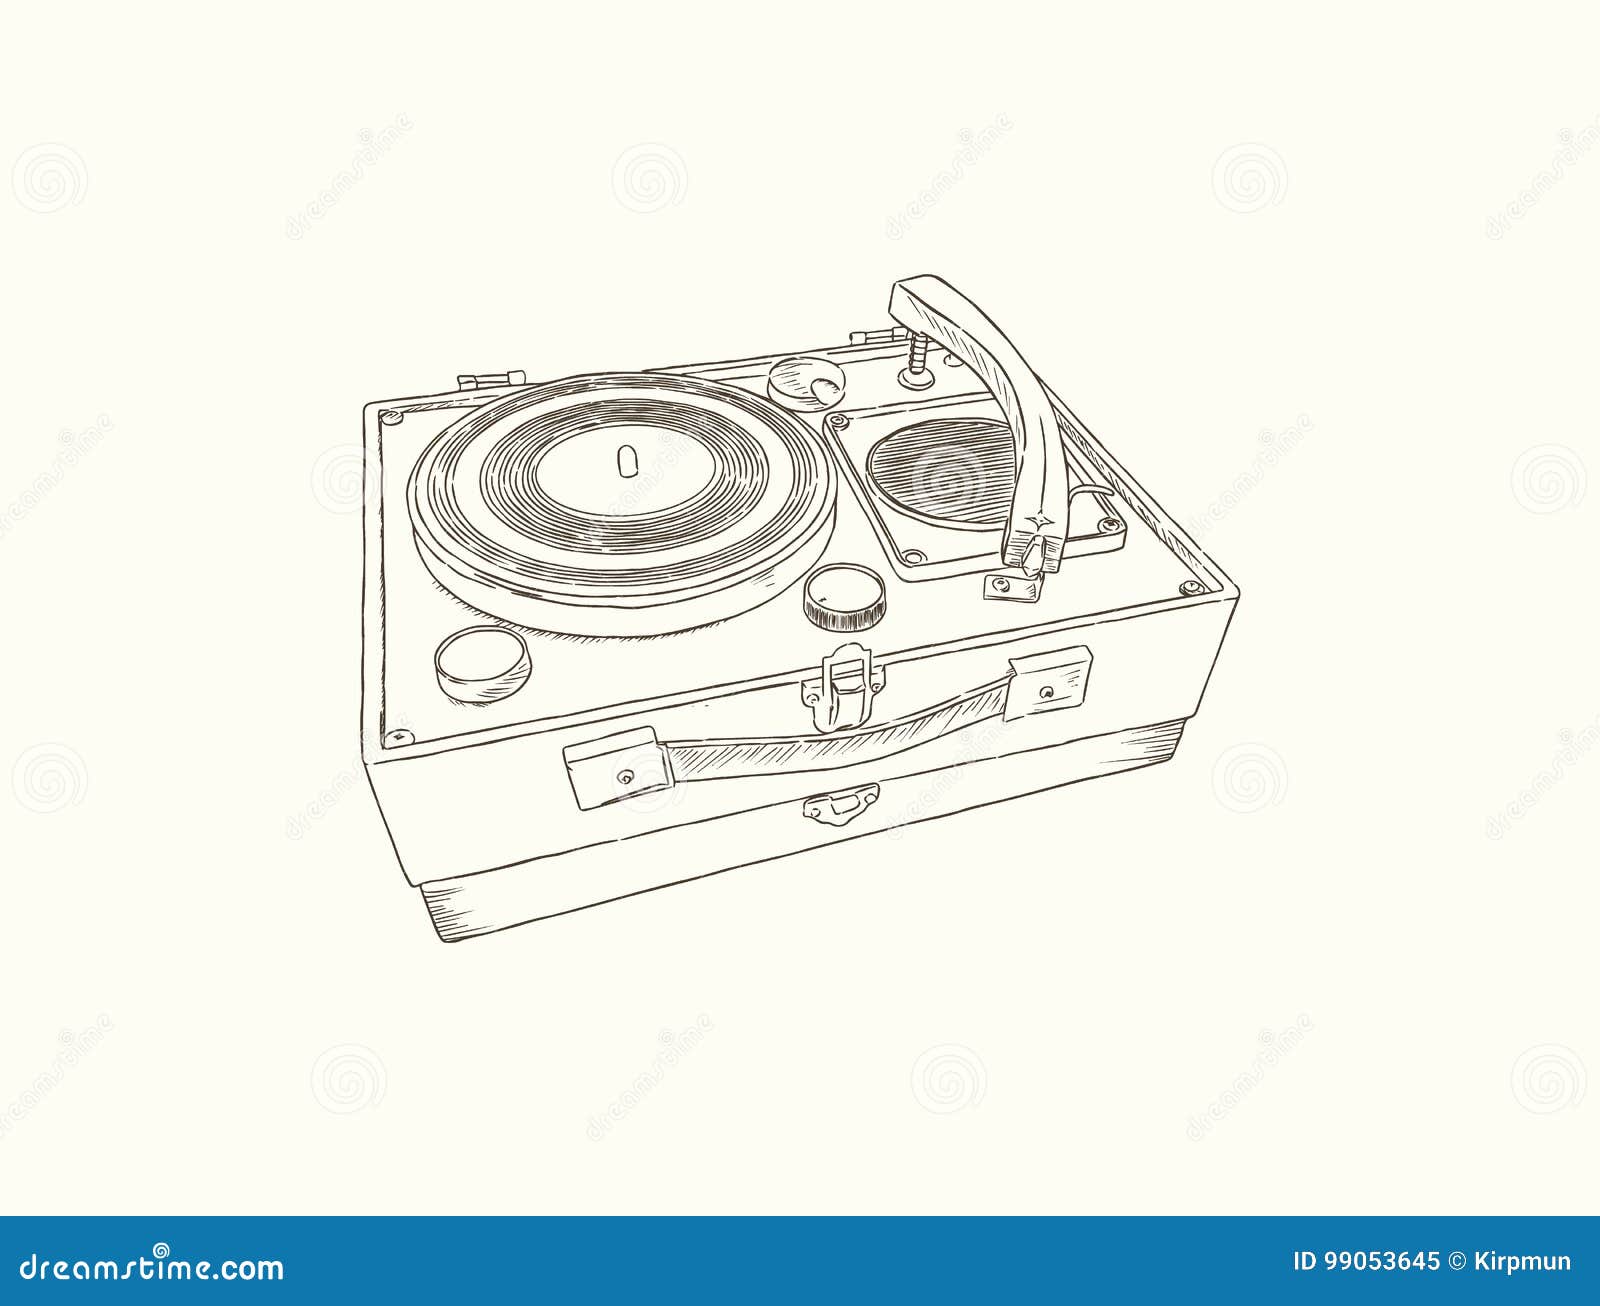 Vintage Turntable. Record Player Vinyl Record. Sketch Vector. Stock